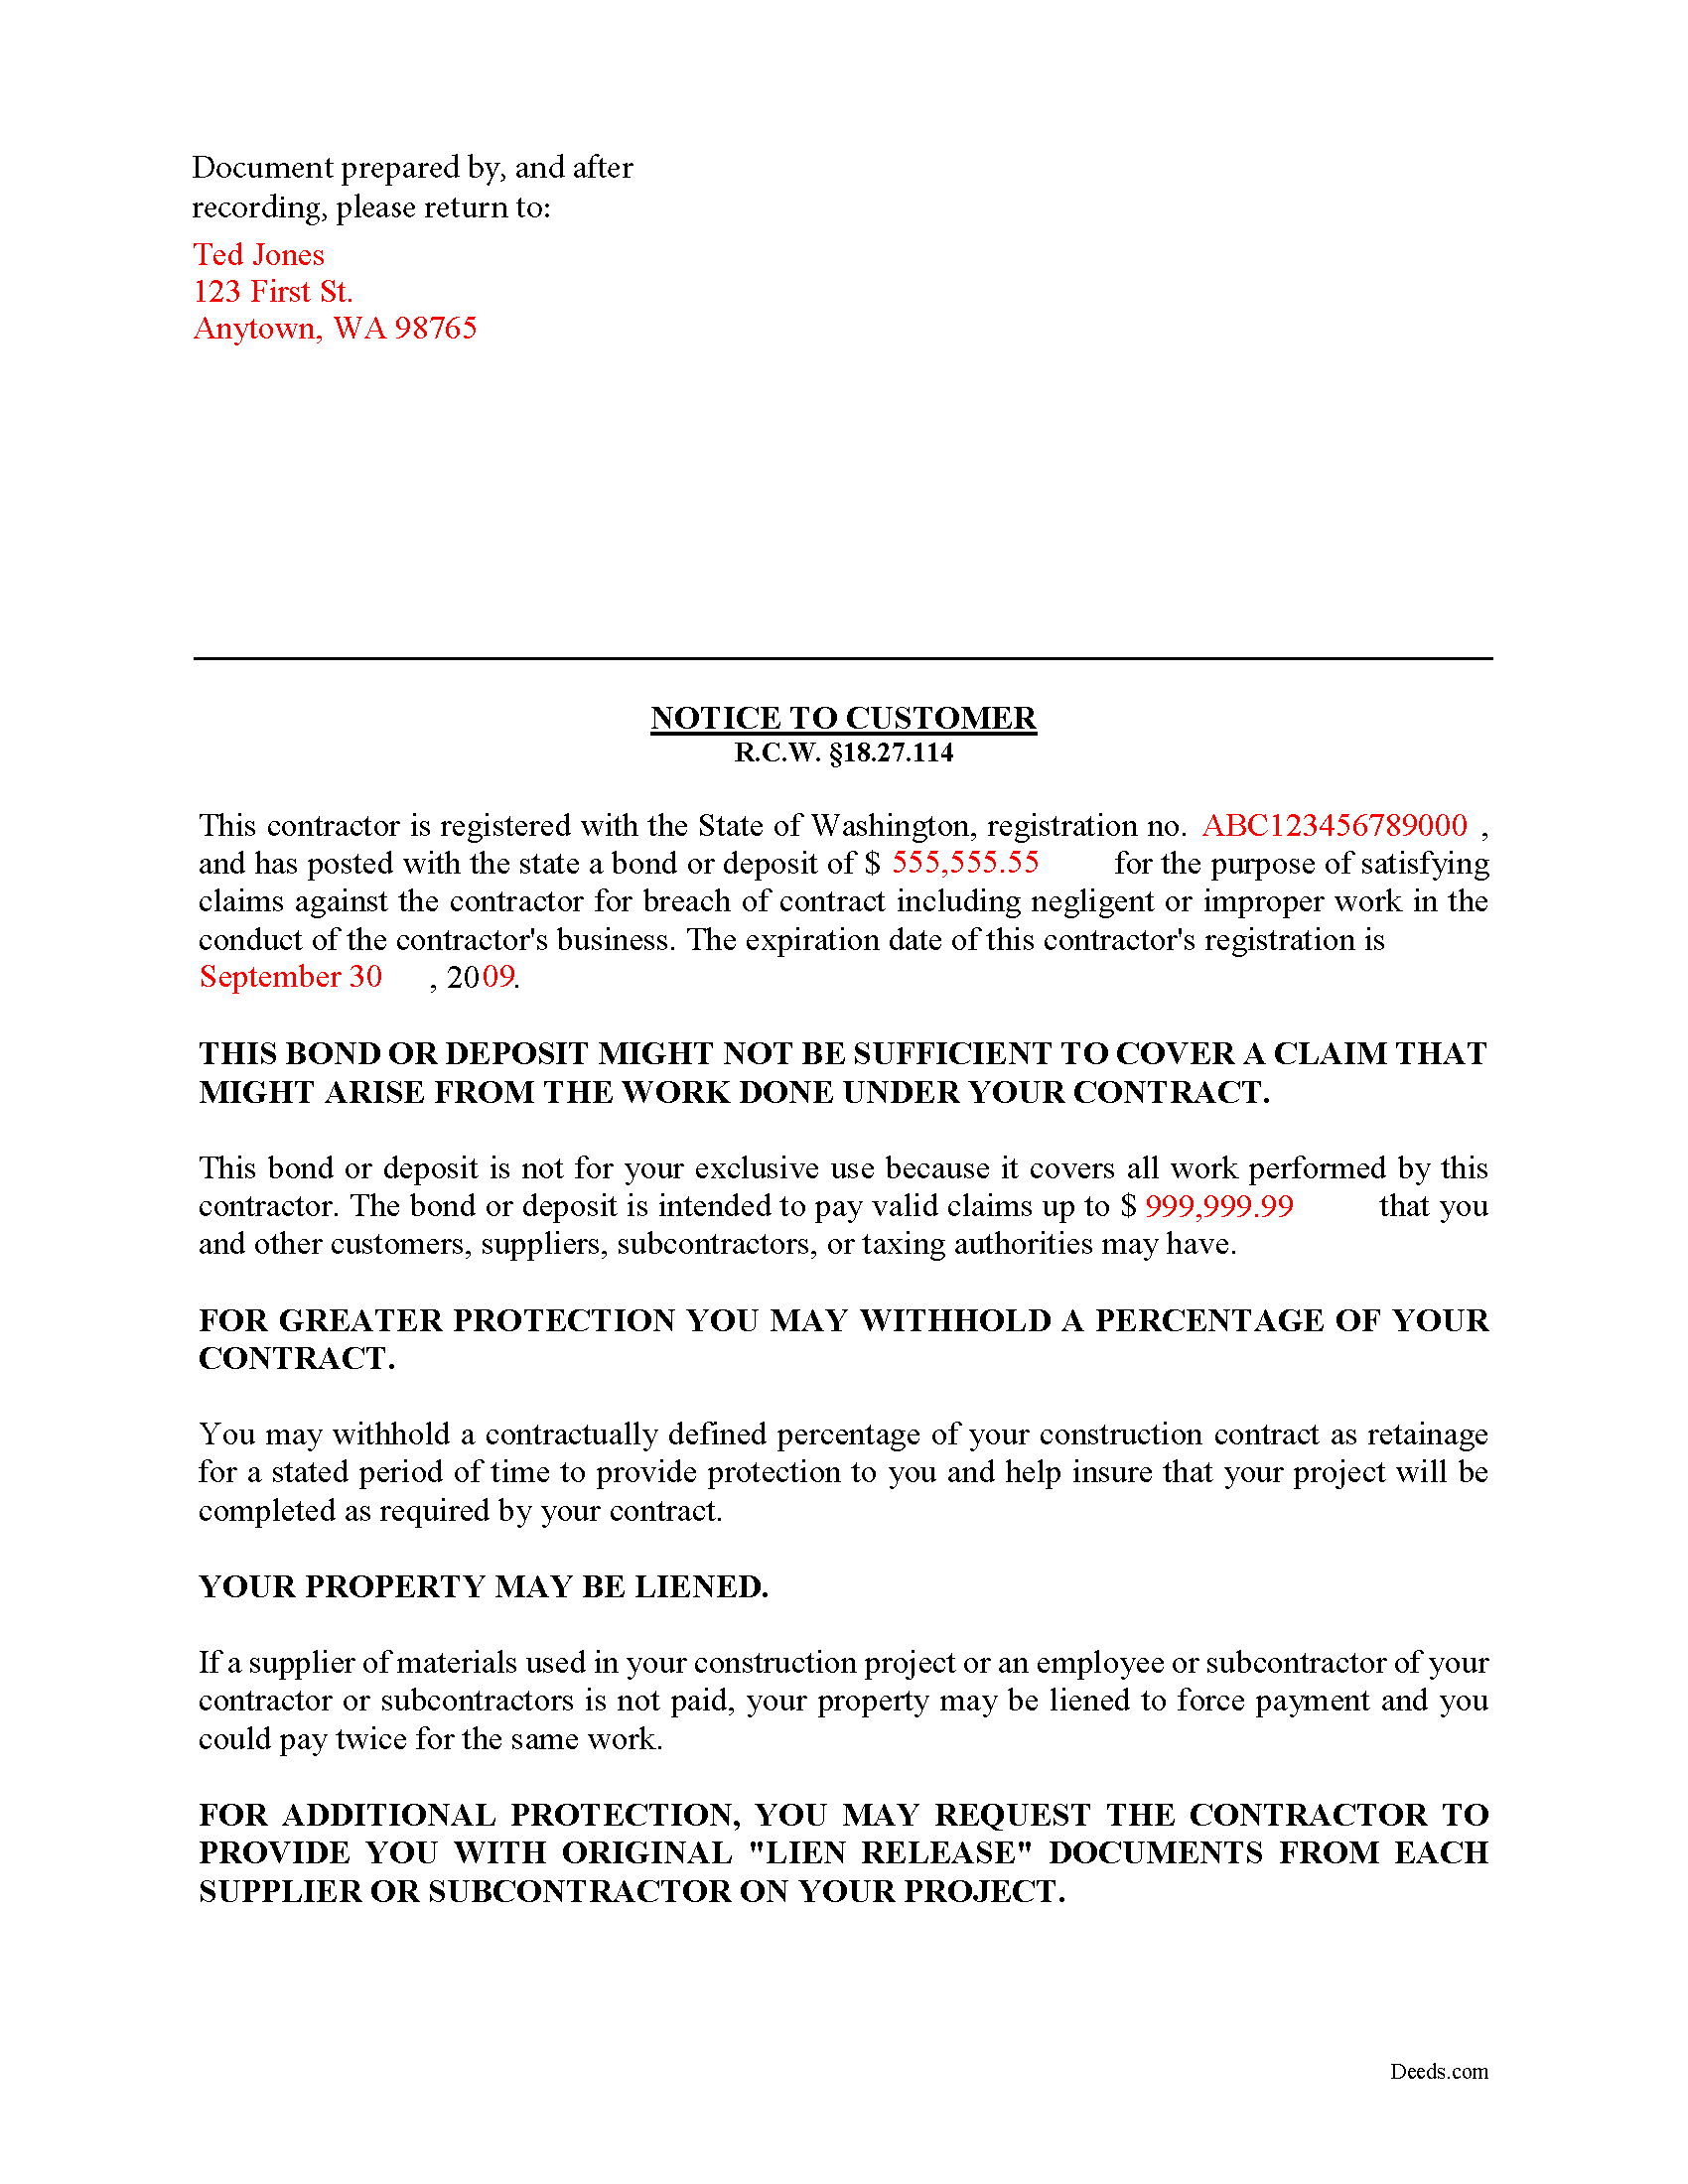 Completed Example of the Notice to Customer Document